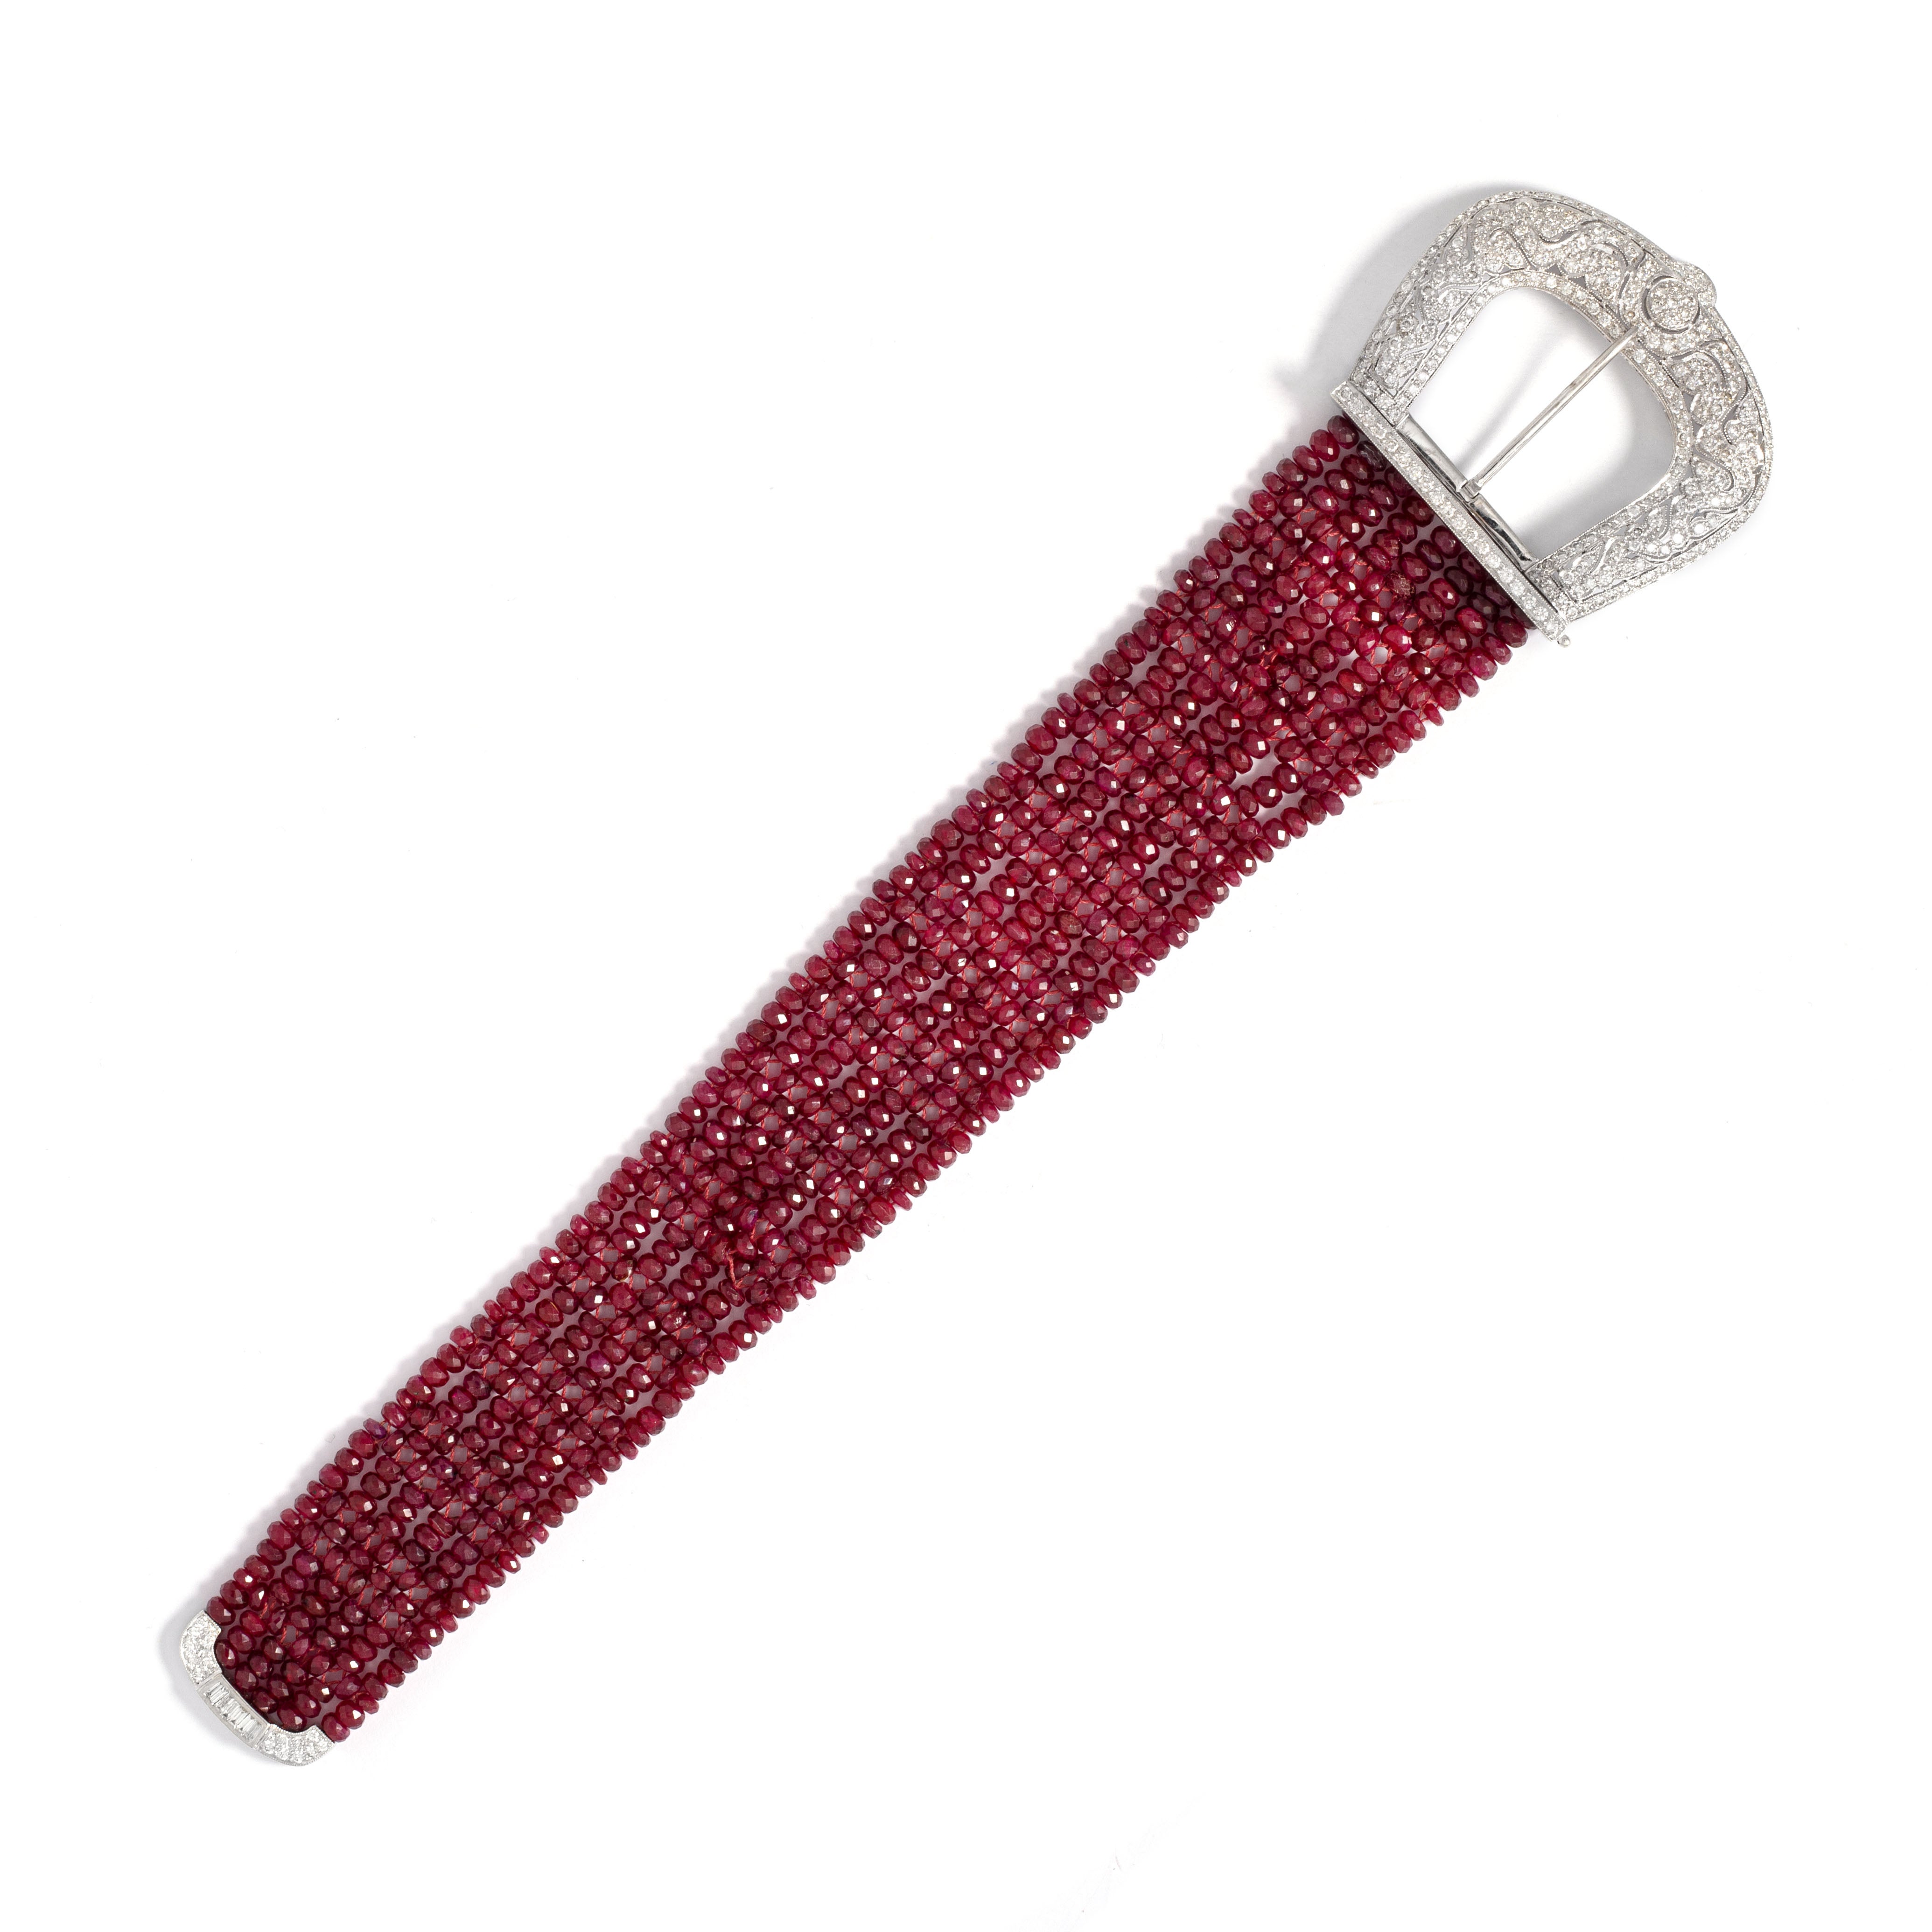 Belle Epoque design pair of diamond bracelets set respectively with rubies and sapphires. 

Ruby Bracelet:
Width: 2.80 up to 5.00 centimeters.
Length: 25.70 centimeters.
Weight: 67.01 grams.

Sapphire Bracelet:
Width: 2.70 up to 5.00